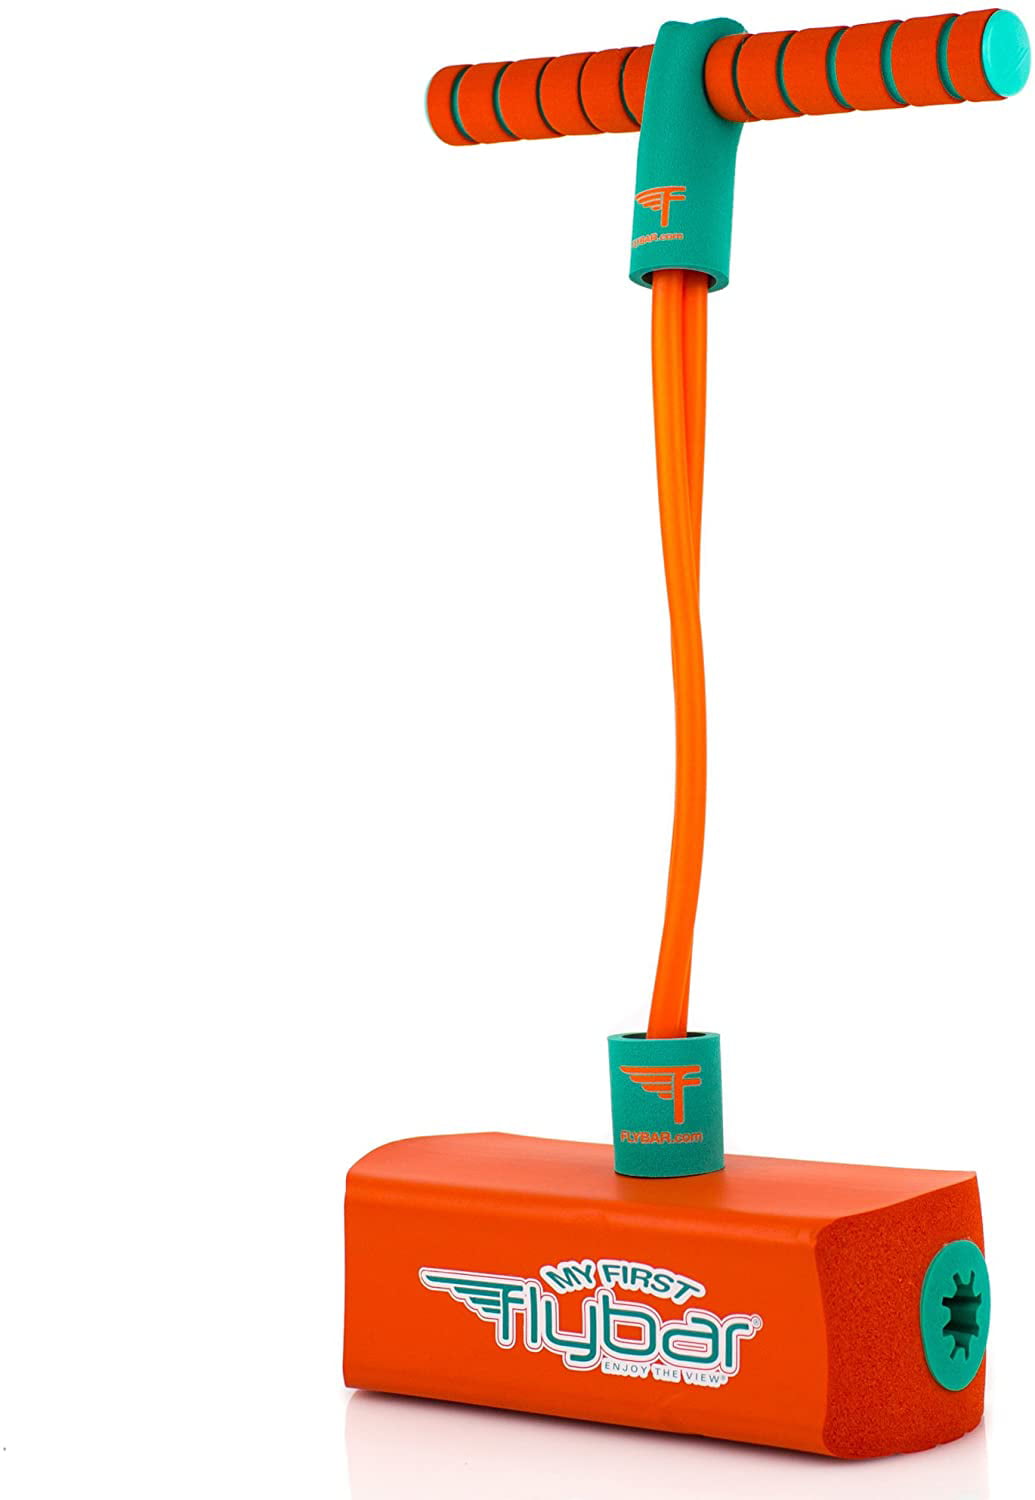 Kids Foam Pogo Jumper Outdoor Indoor Toy Supports up to 250 Pounds Ages 3 for sale online